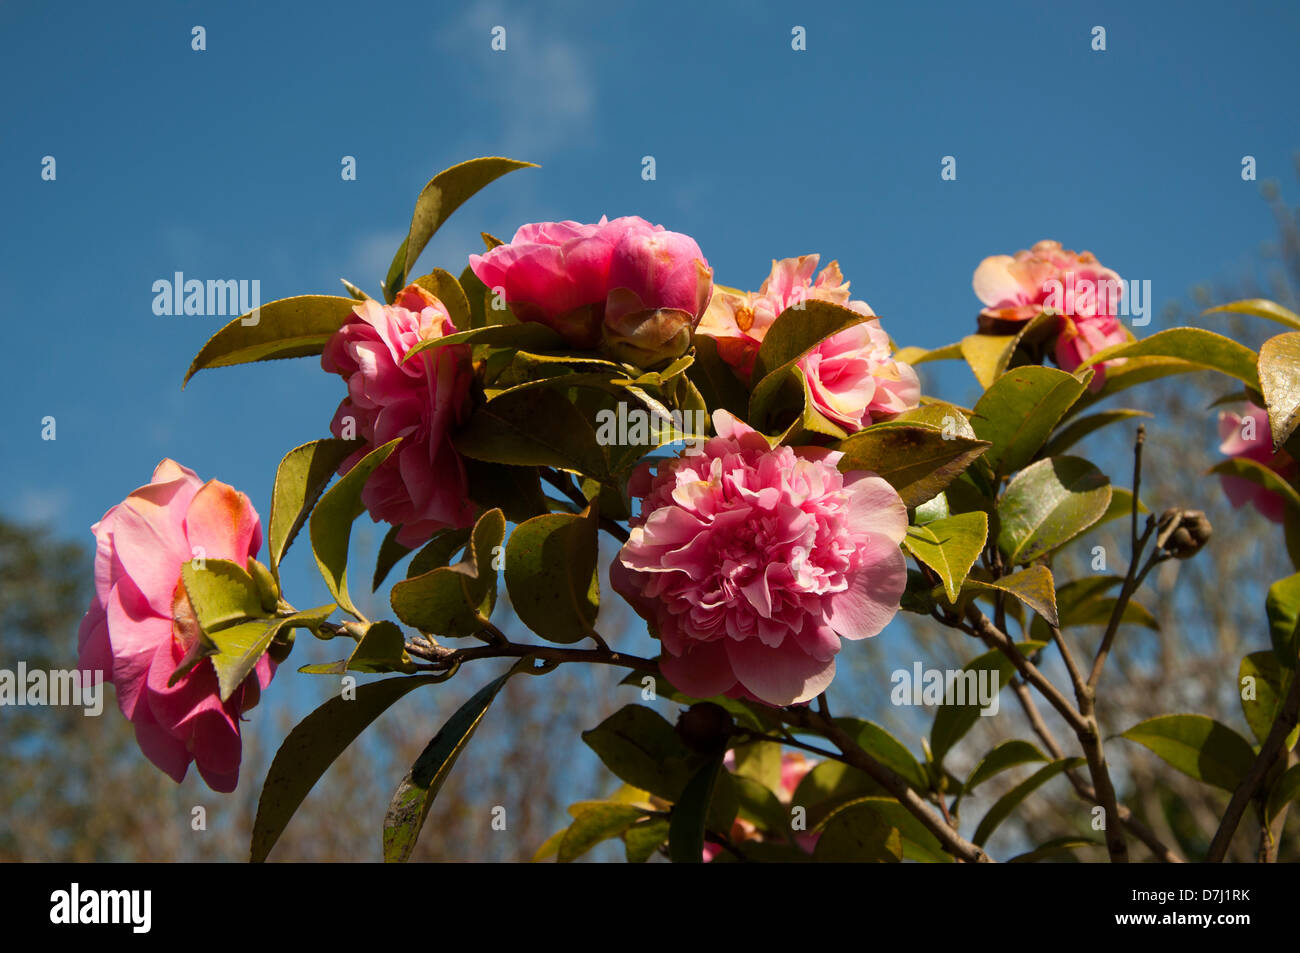 Camellia flowerheads, camellia japonica, theaceae, in bloom, sunny,blue sky background Stock Photo